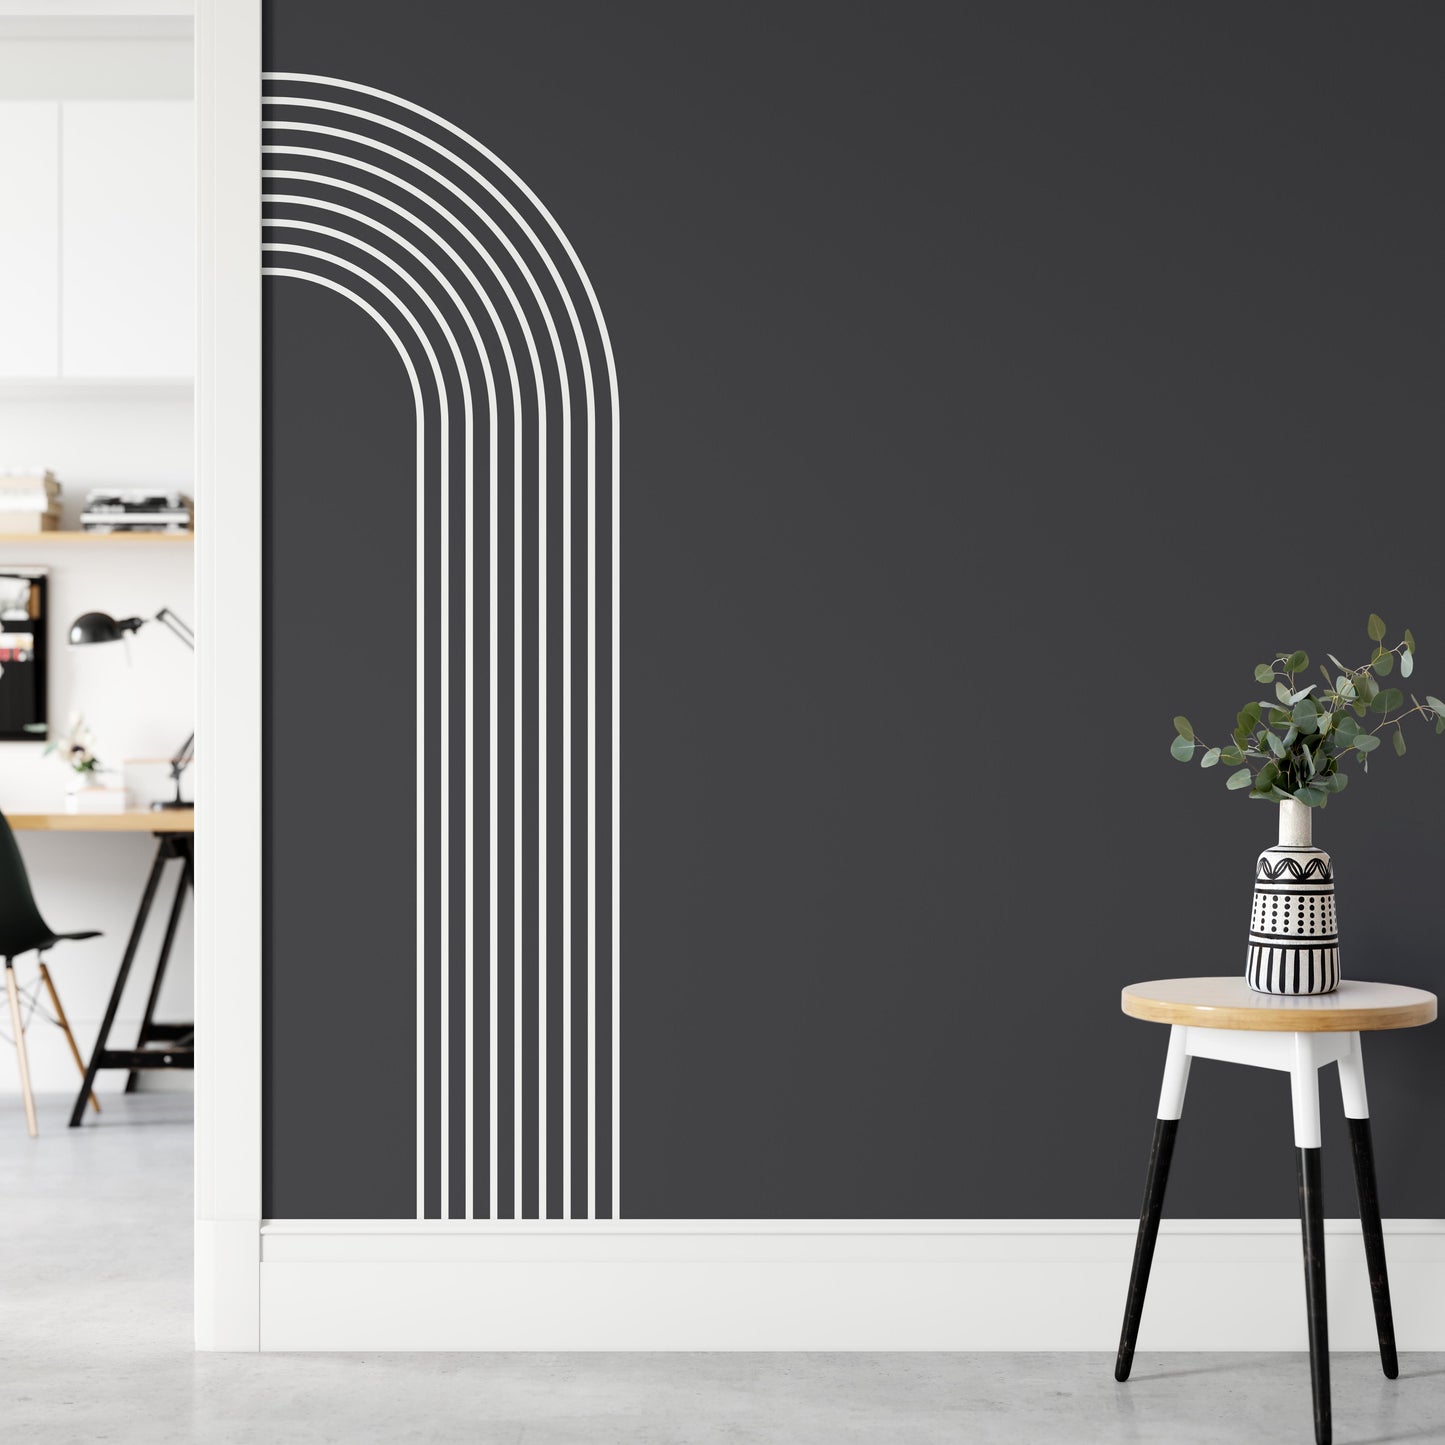 Modern Boho Chic Half Arch Concentric Lines Wall Art Sticker | Apex Stickers